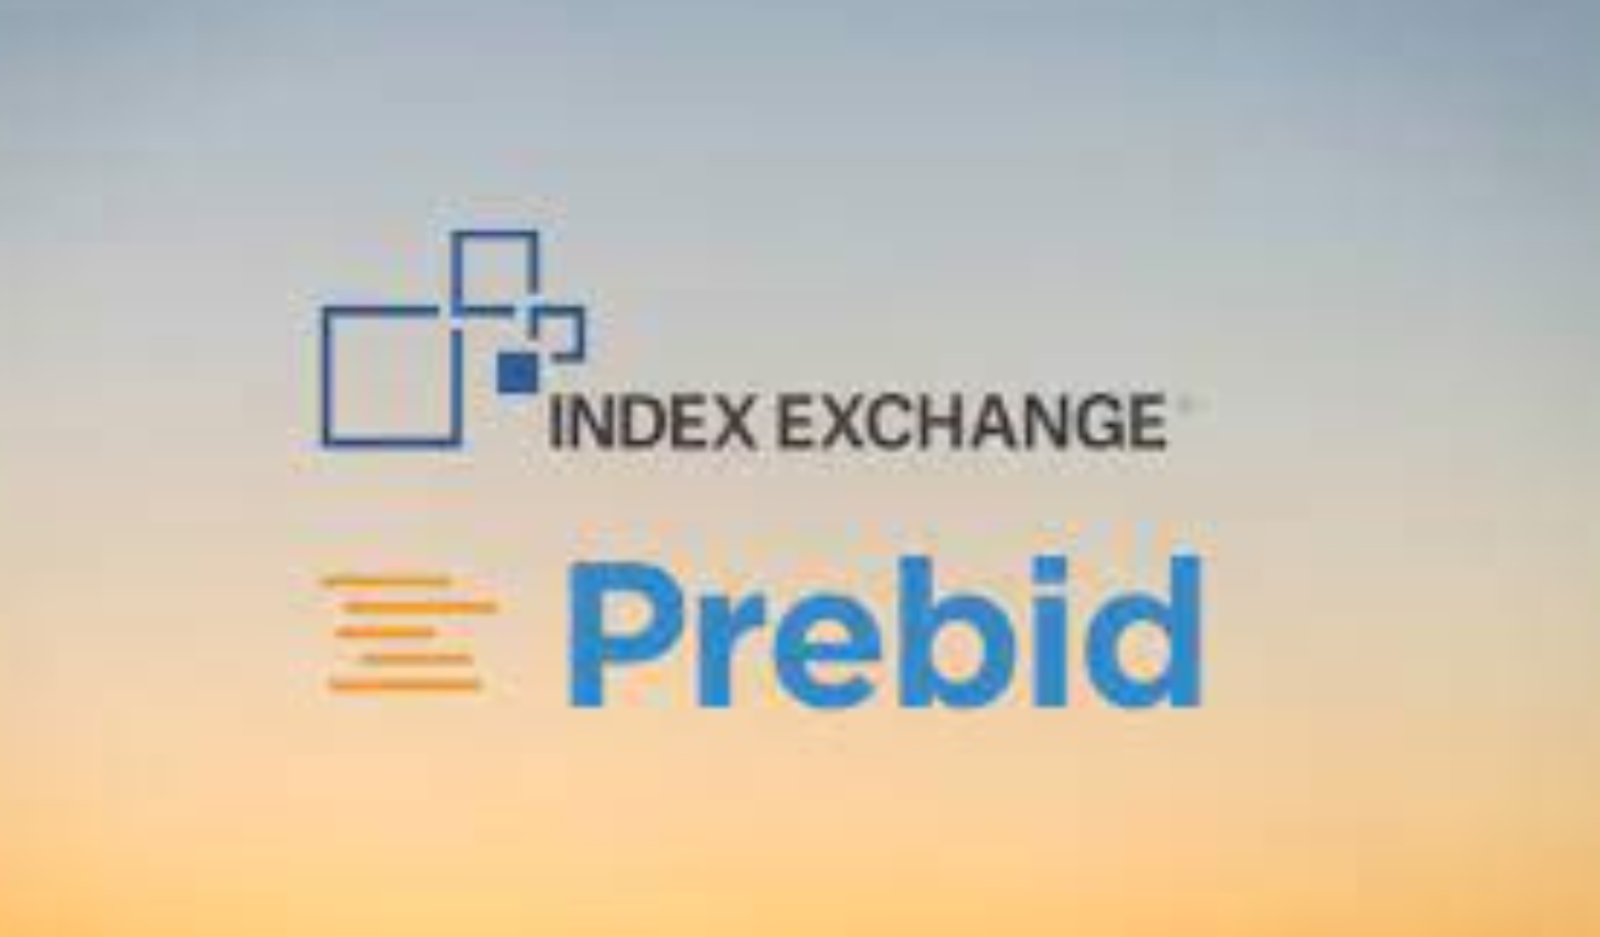 Index Exchange Joins Hands with Prebid.Org to Deal with Industry Crisis